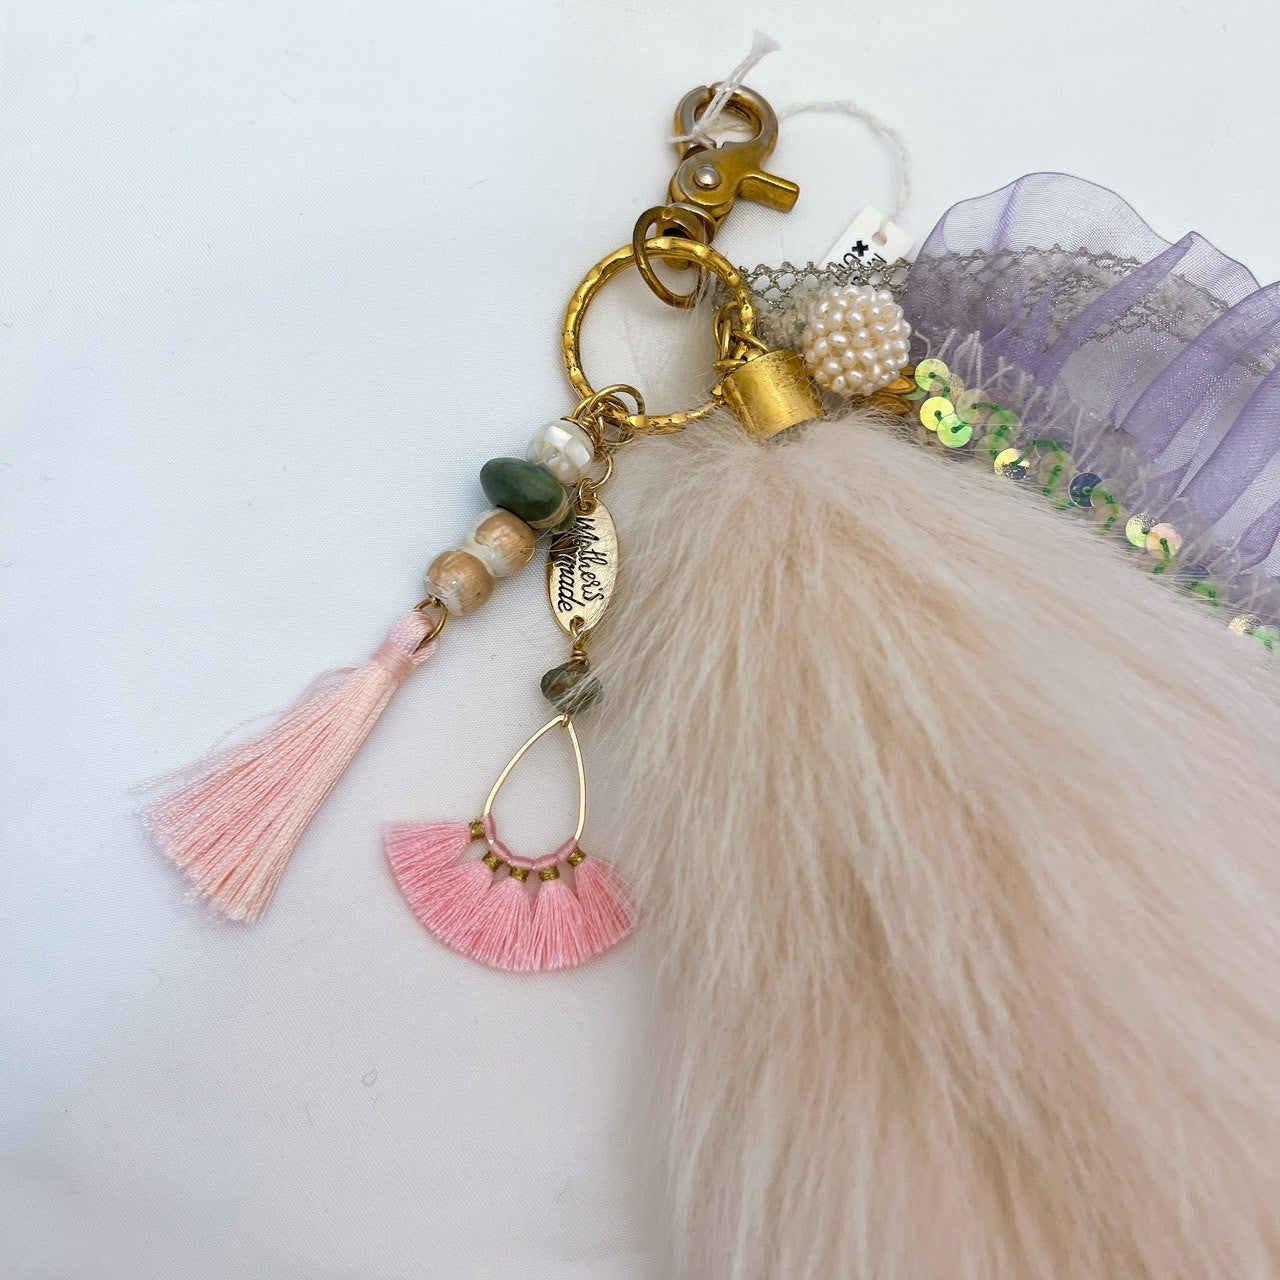 Mother‘s made × UME fur charm